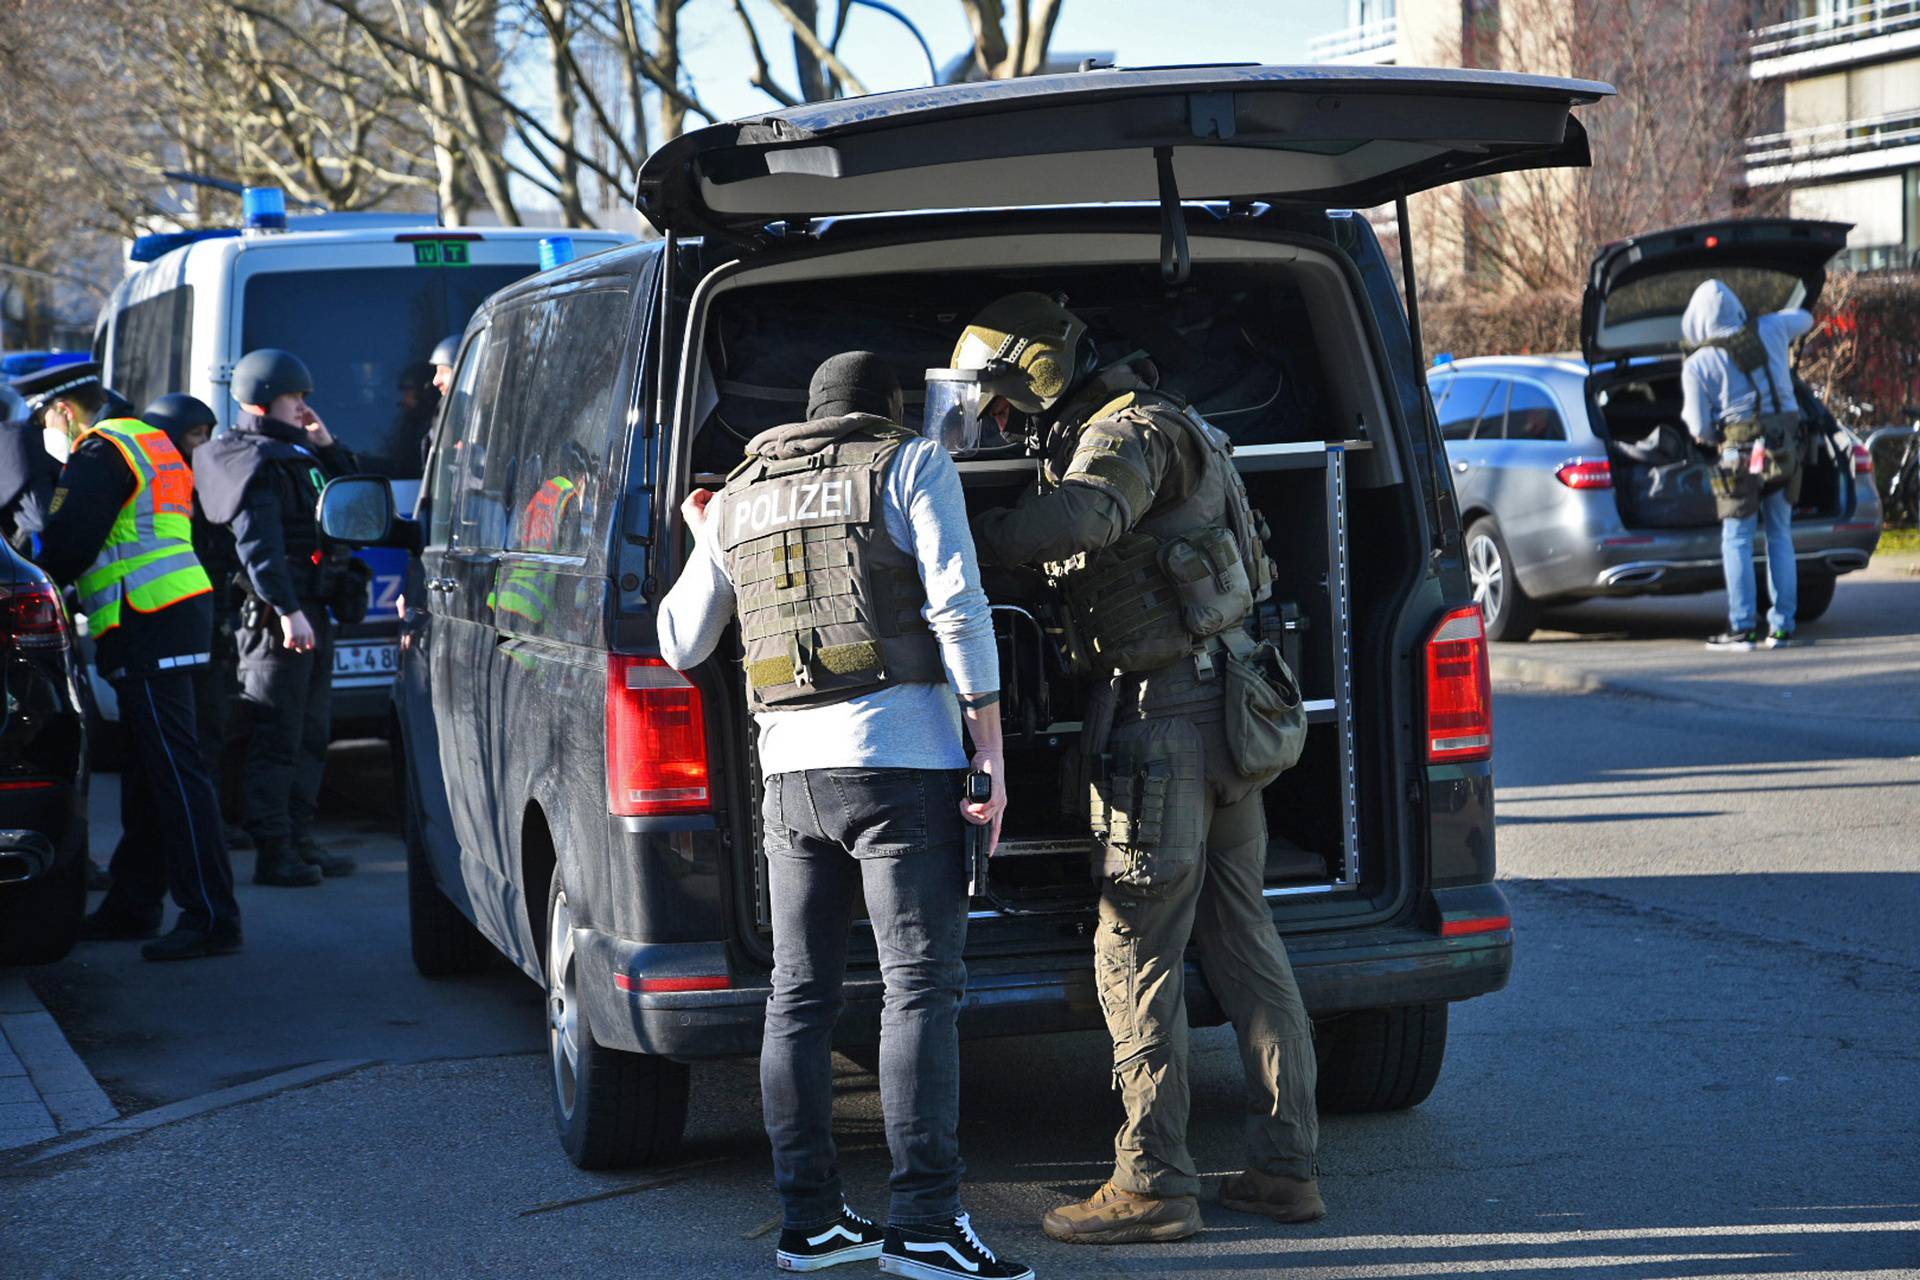 Amok run on university campus in Heidelberg with several people injured